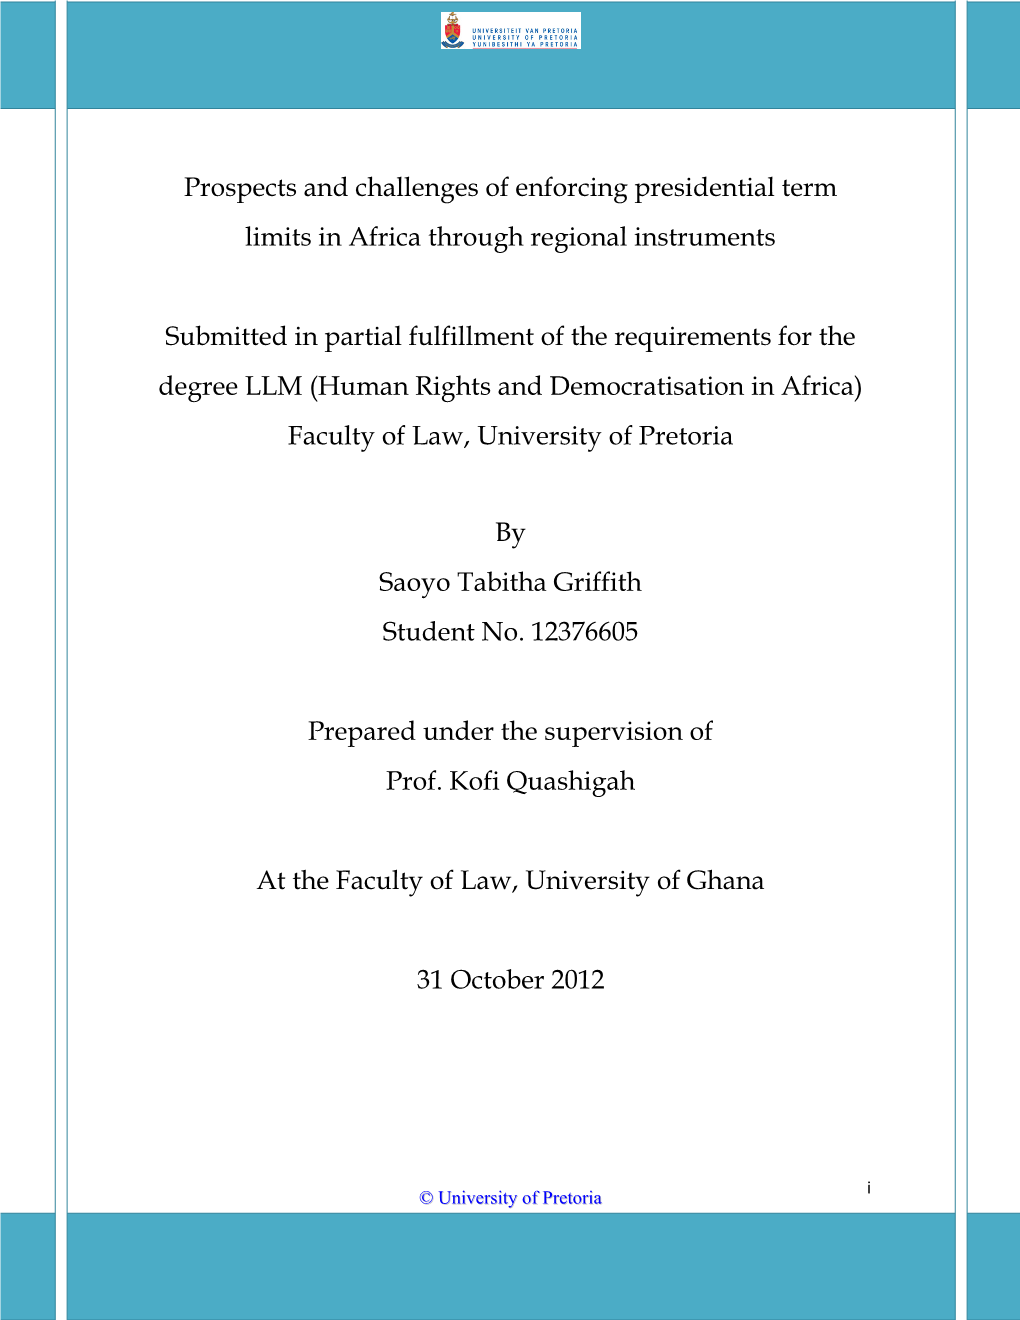 Prospects and Challenges of Enforcing Presidential Term Limits in Africa Through Regional Instruments